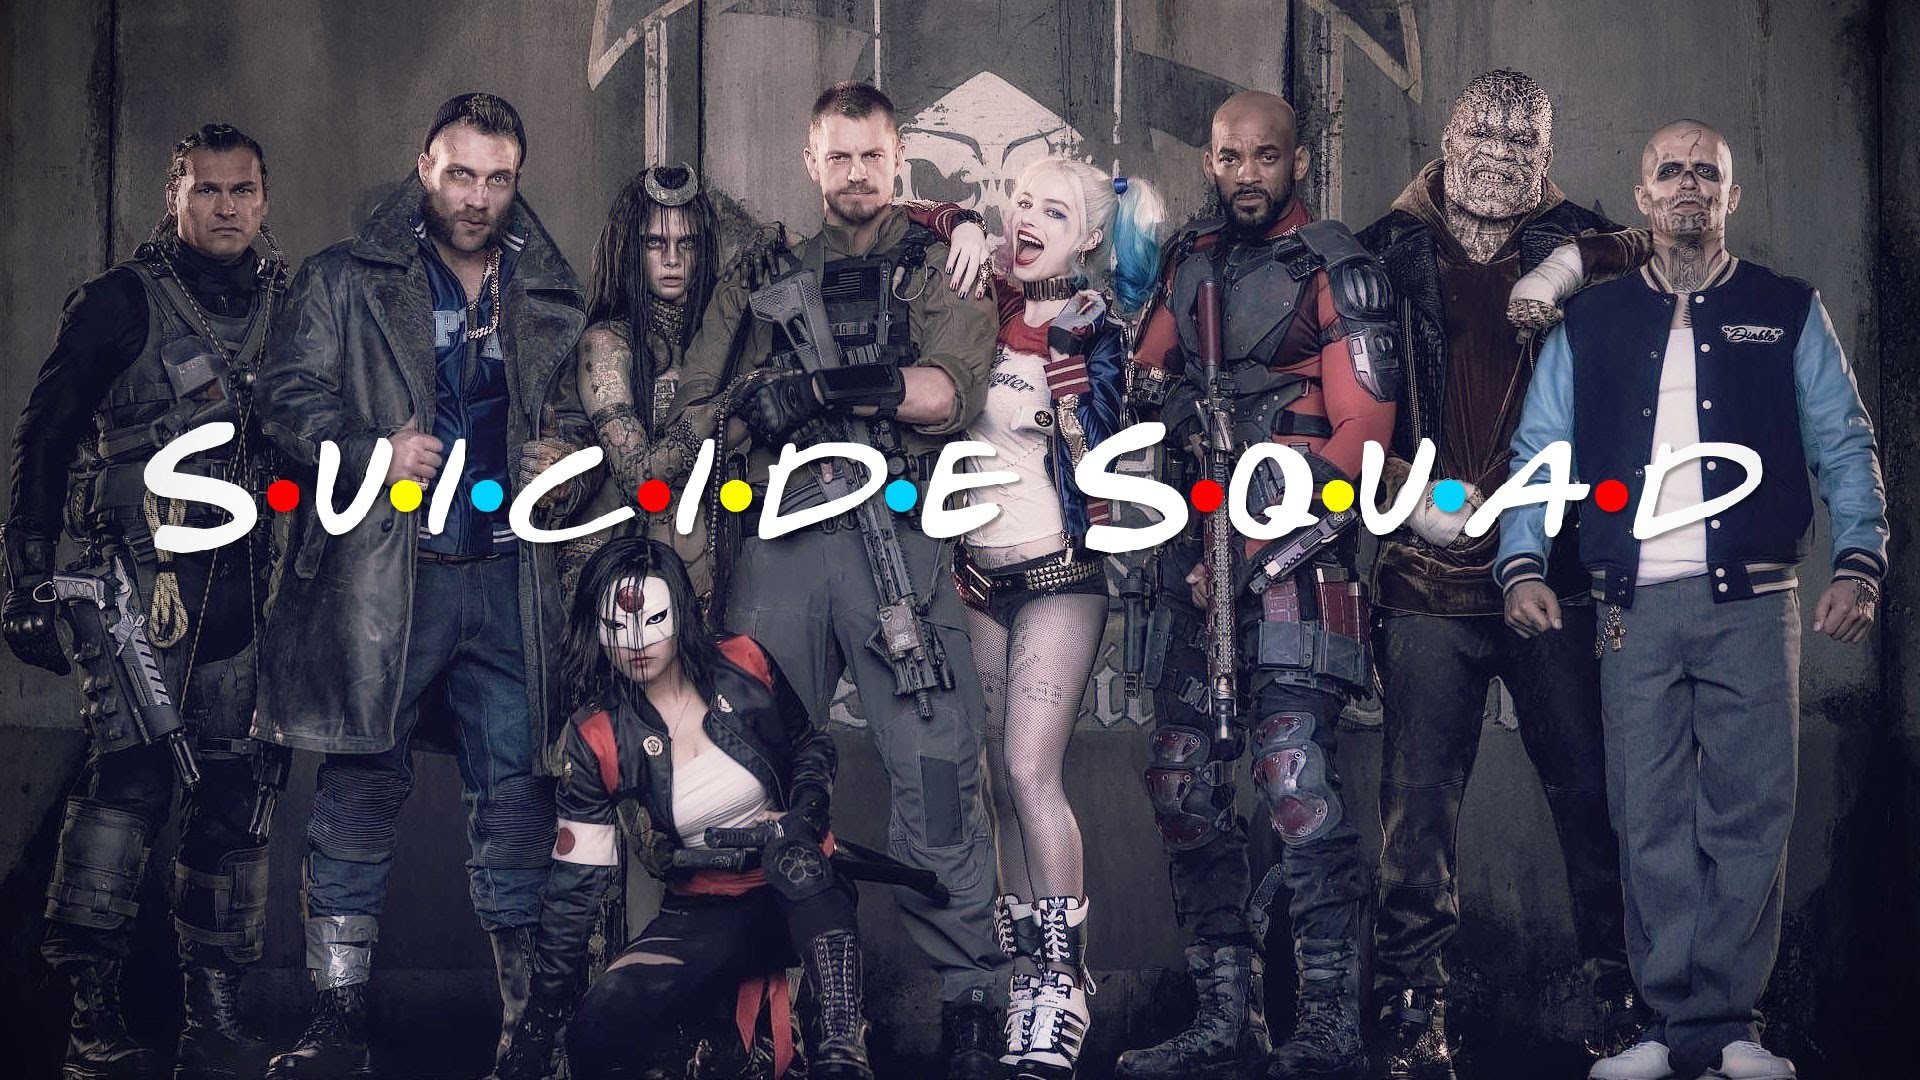 1920x1080 Suicide Squad HD pictures Suicide Squad Full hd wallpapers